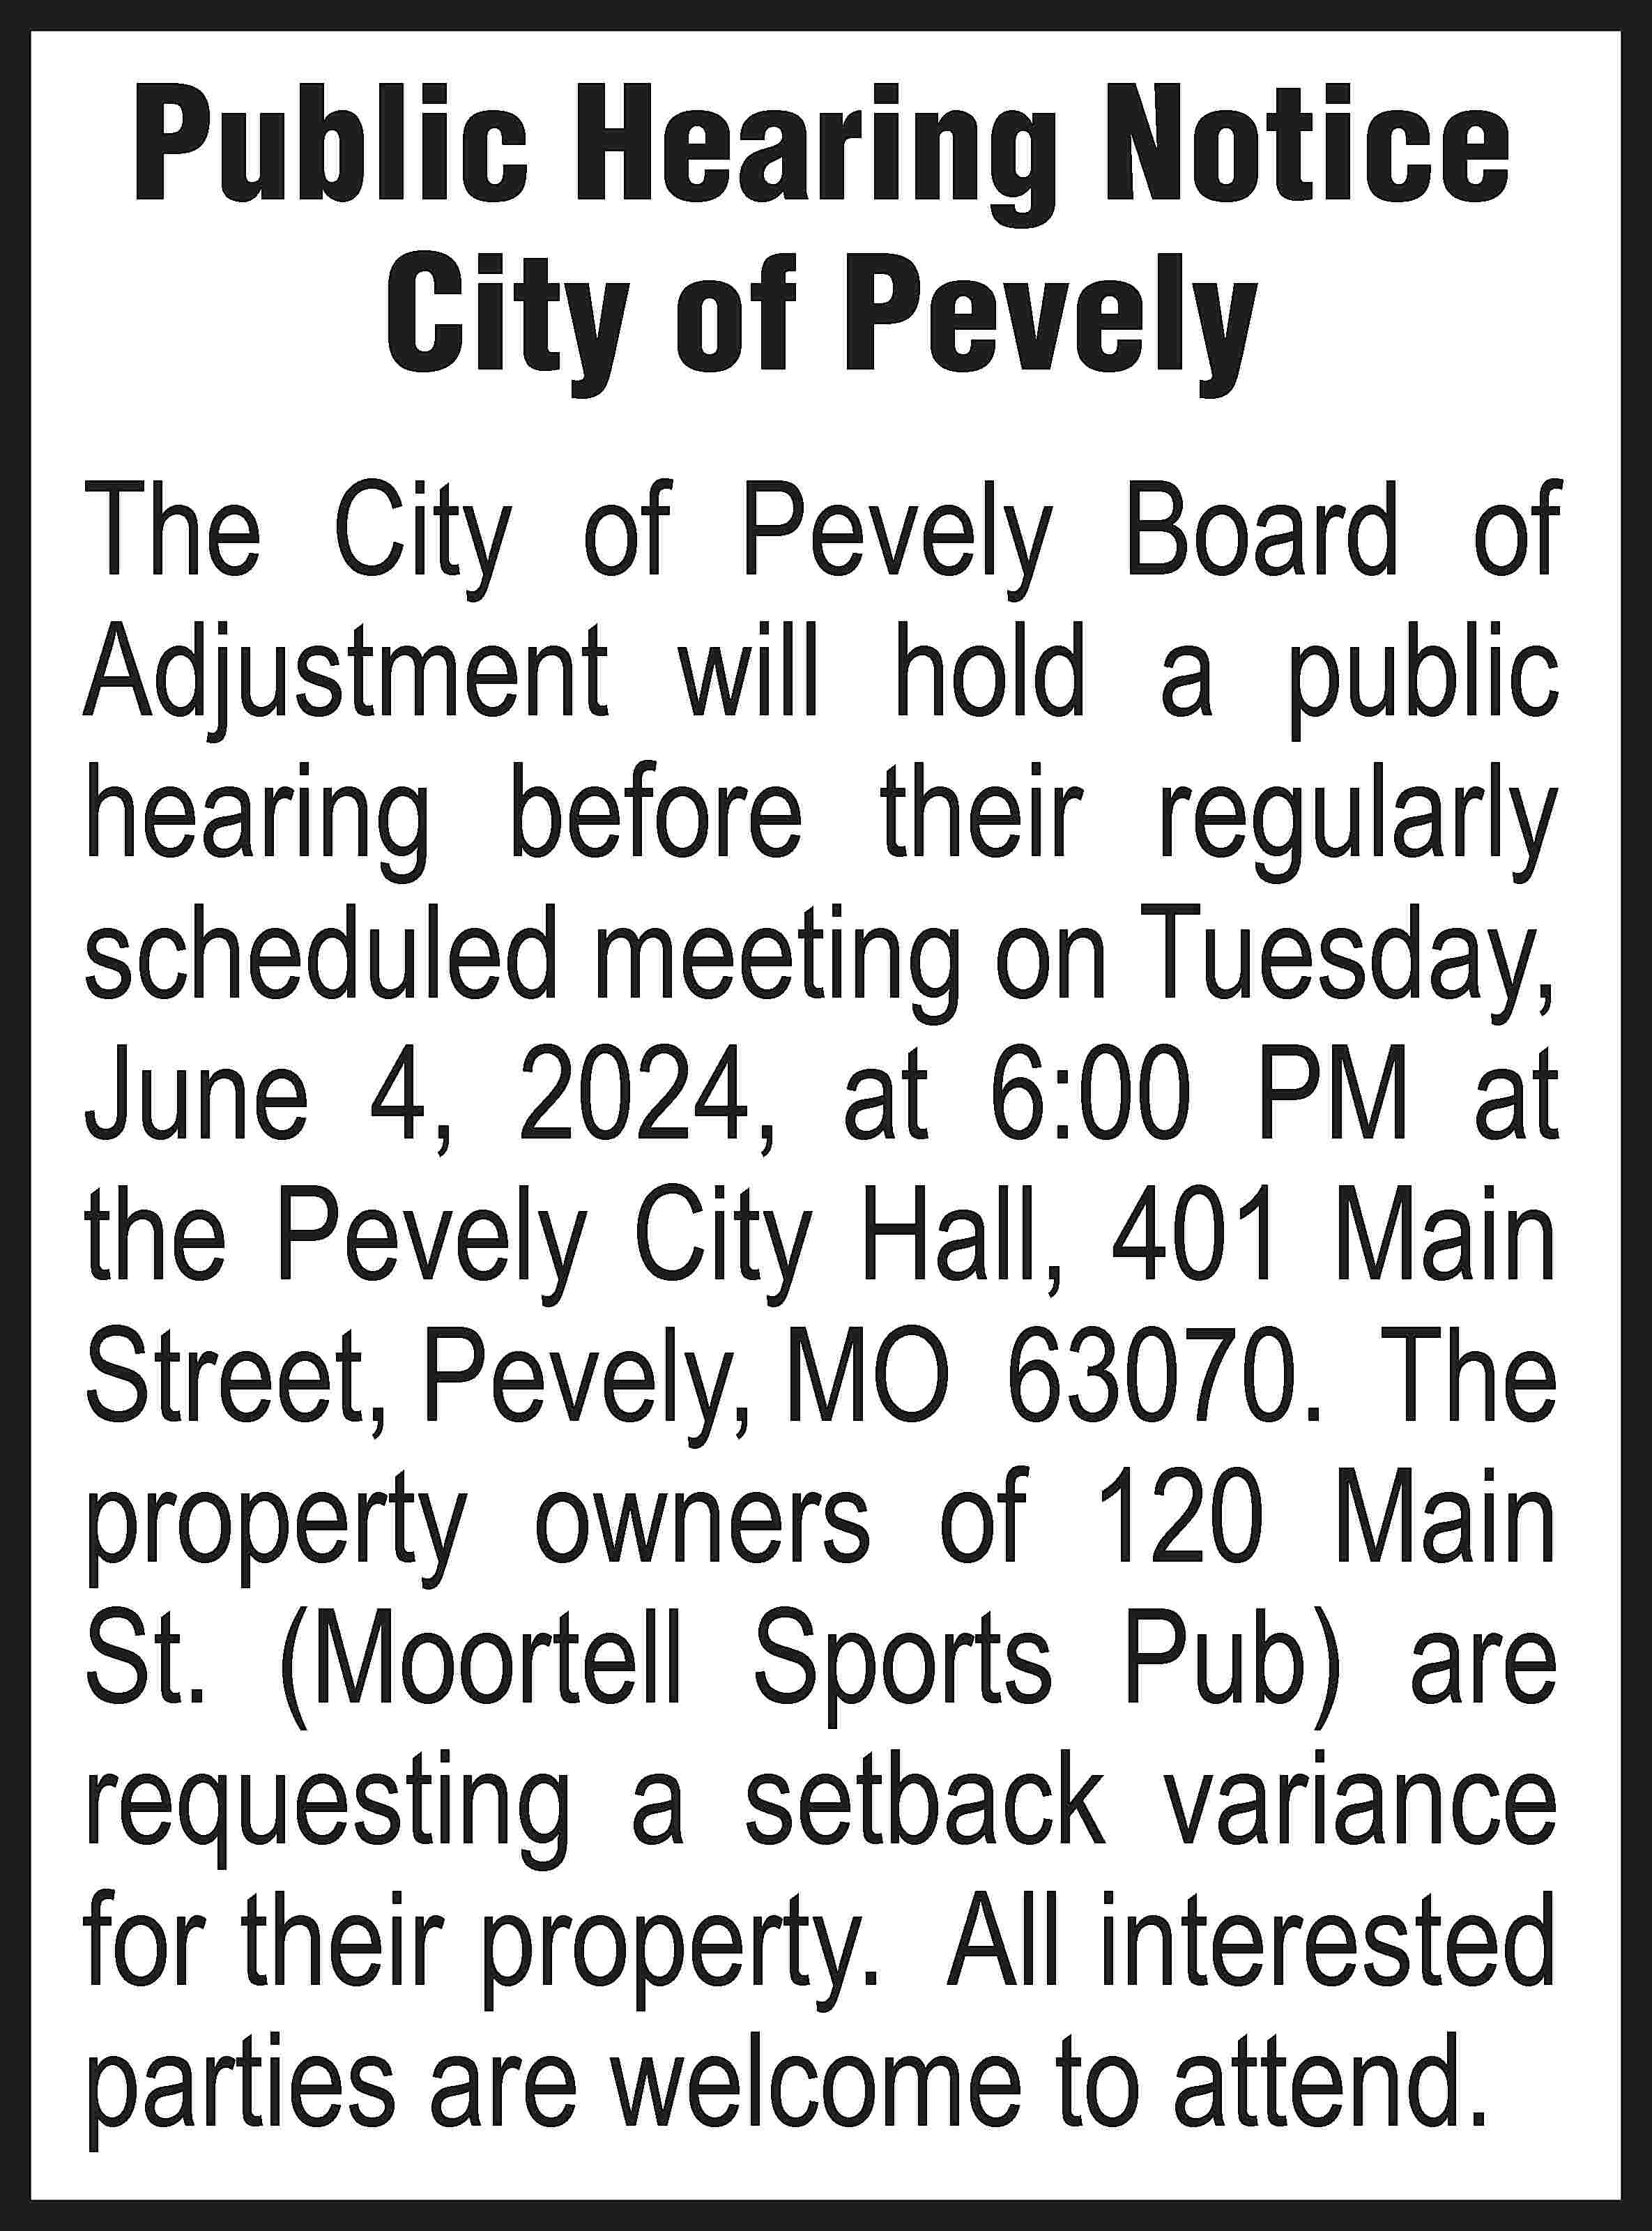 Public Hearing Notice City of  Public Hearing Notice City of Pevely The City of Pevely Board of Adjustment will hold a public hearing before their regularly scheduled meeting on Tuesday, June 4, 2024, at 6:00 PM at the Pevely City Hall, 401 Main Street, Pevely, MO 63070. The property owners of 120 Main St. (Moortell Sports Pub) are requesting a setback variance for their property. All interested parties are welcome to attend.